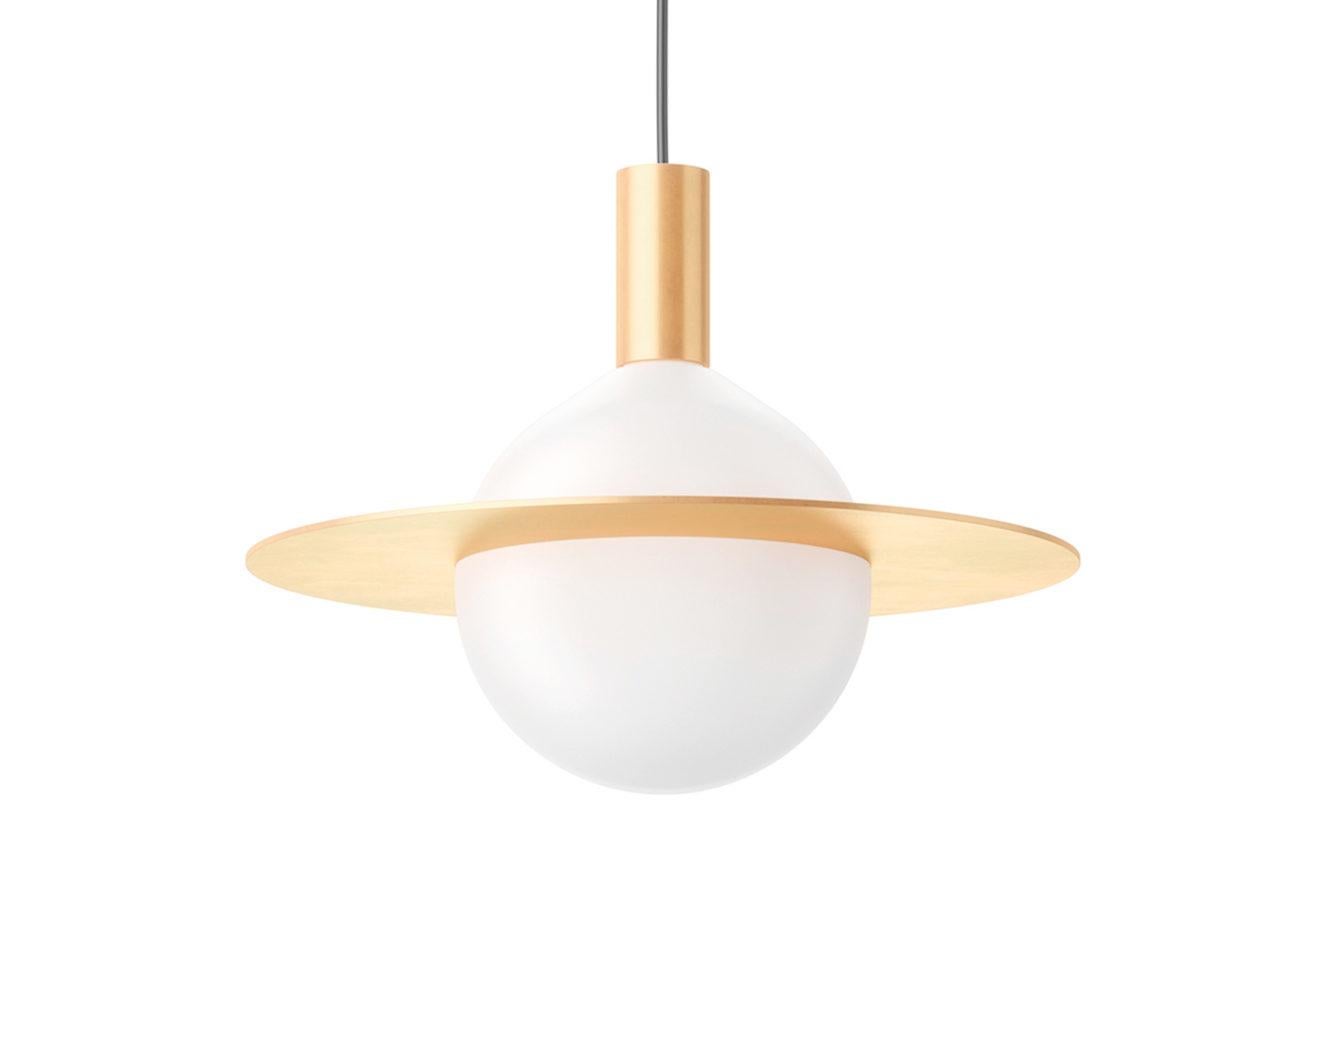 Orbis 25 is a Minimalist pendant lamp design by Wishnya Design Studio.
Brass finish. 

Measures: D 25cm
LED G9 60W 220V - US compatible
Dimmable
Adjustable wire

Two sizes available 
Two finishes available: copper, brass, aluminum.